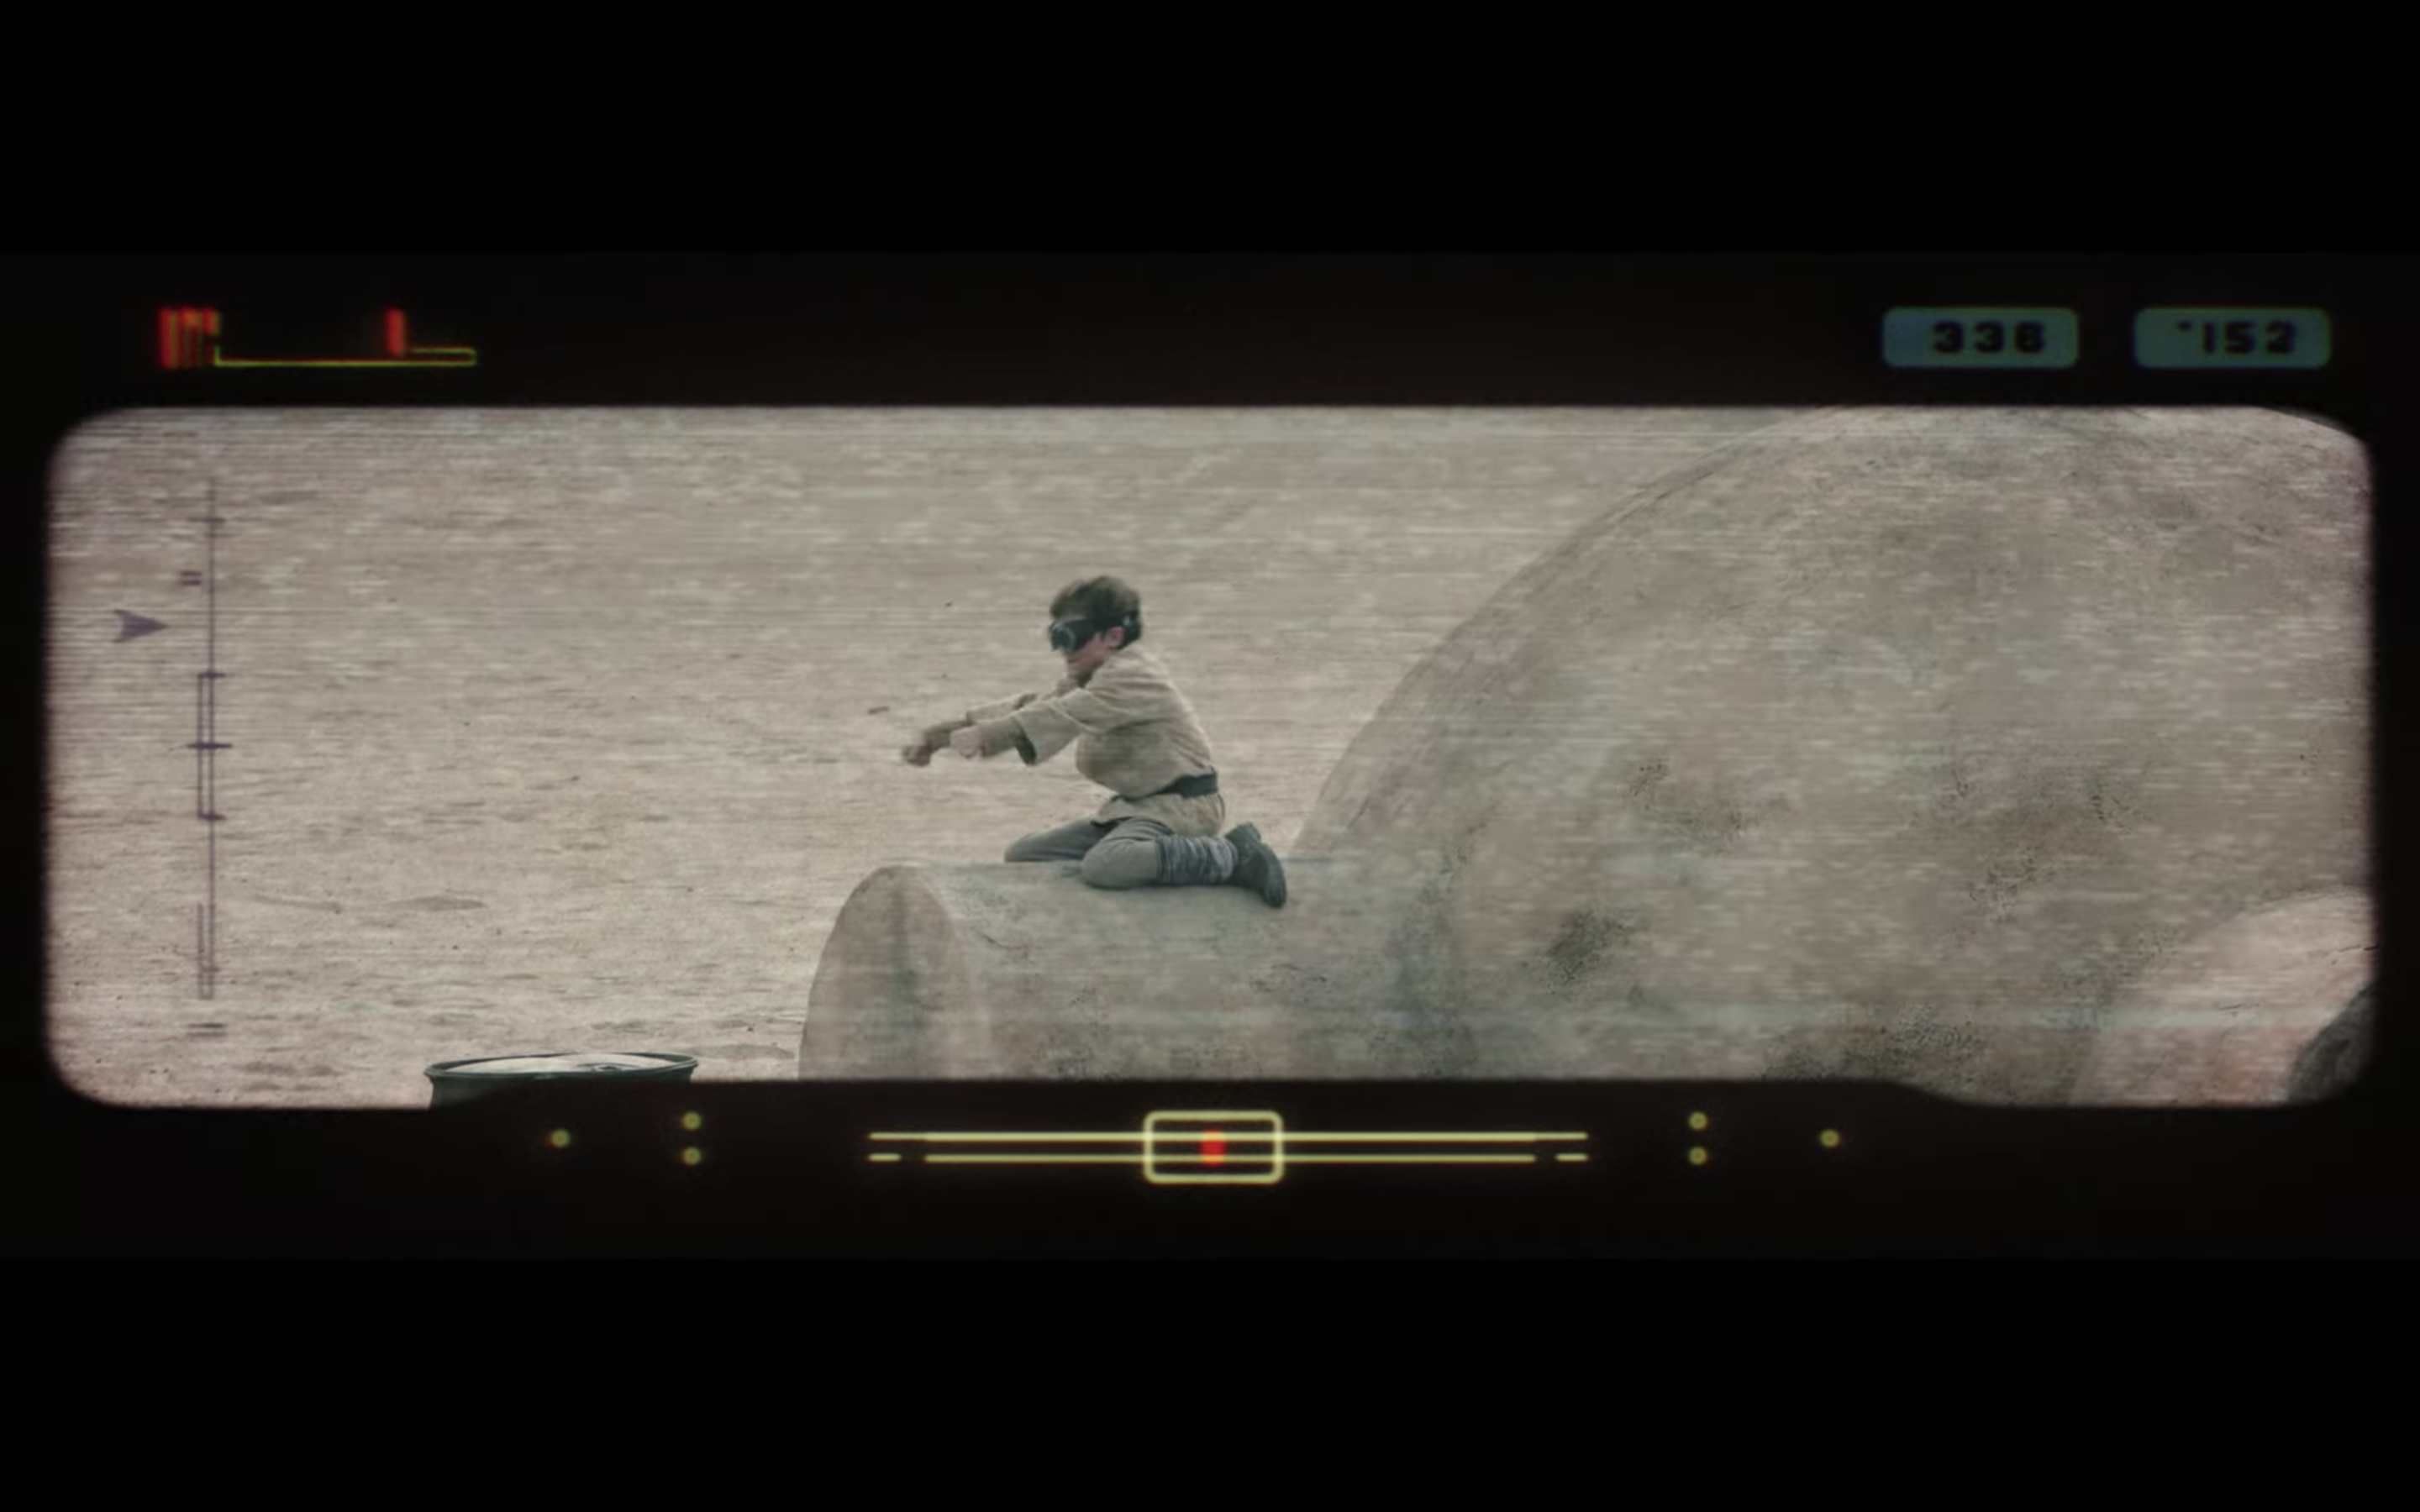 Young Luke Skywalker (looking like he's pretending to race) on the top of his home in Tatooine